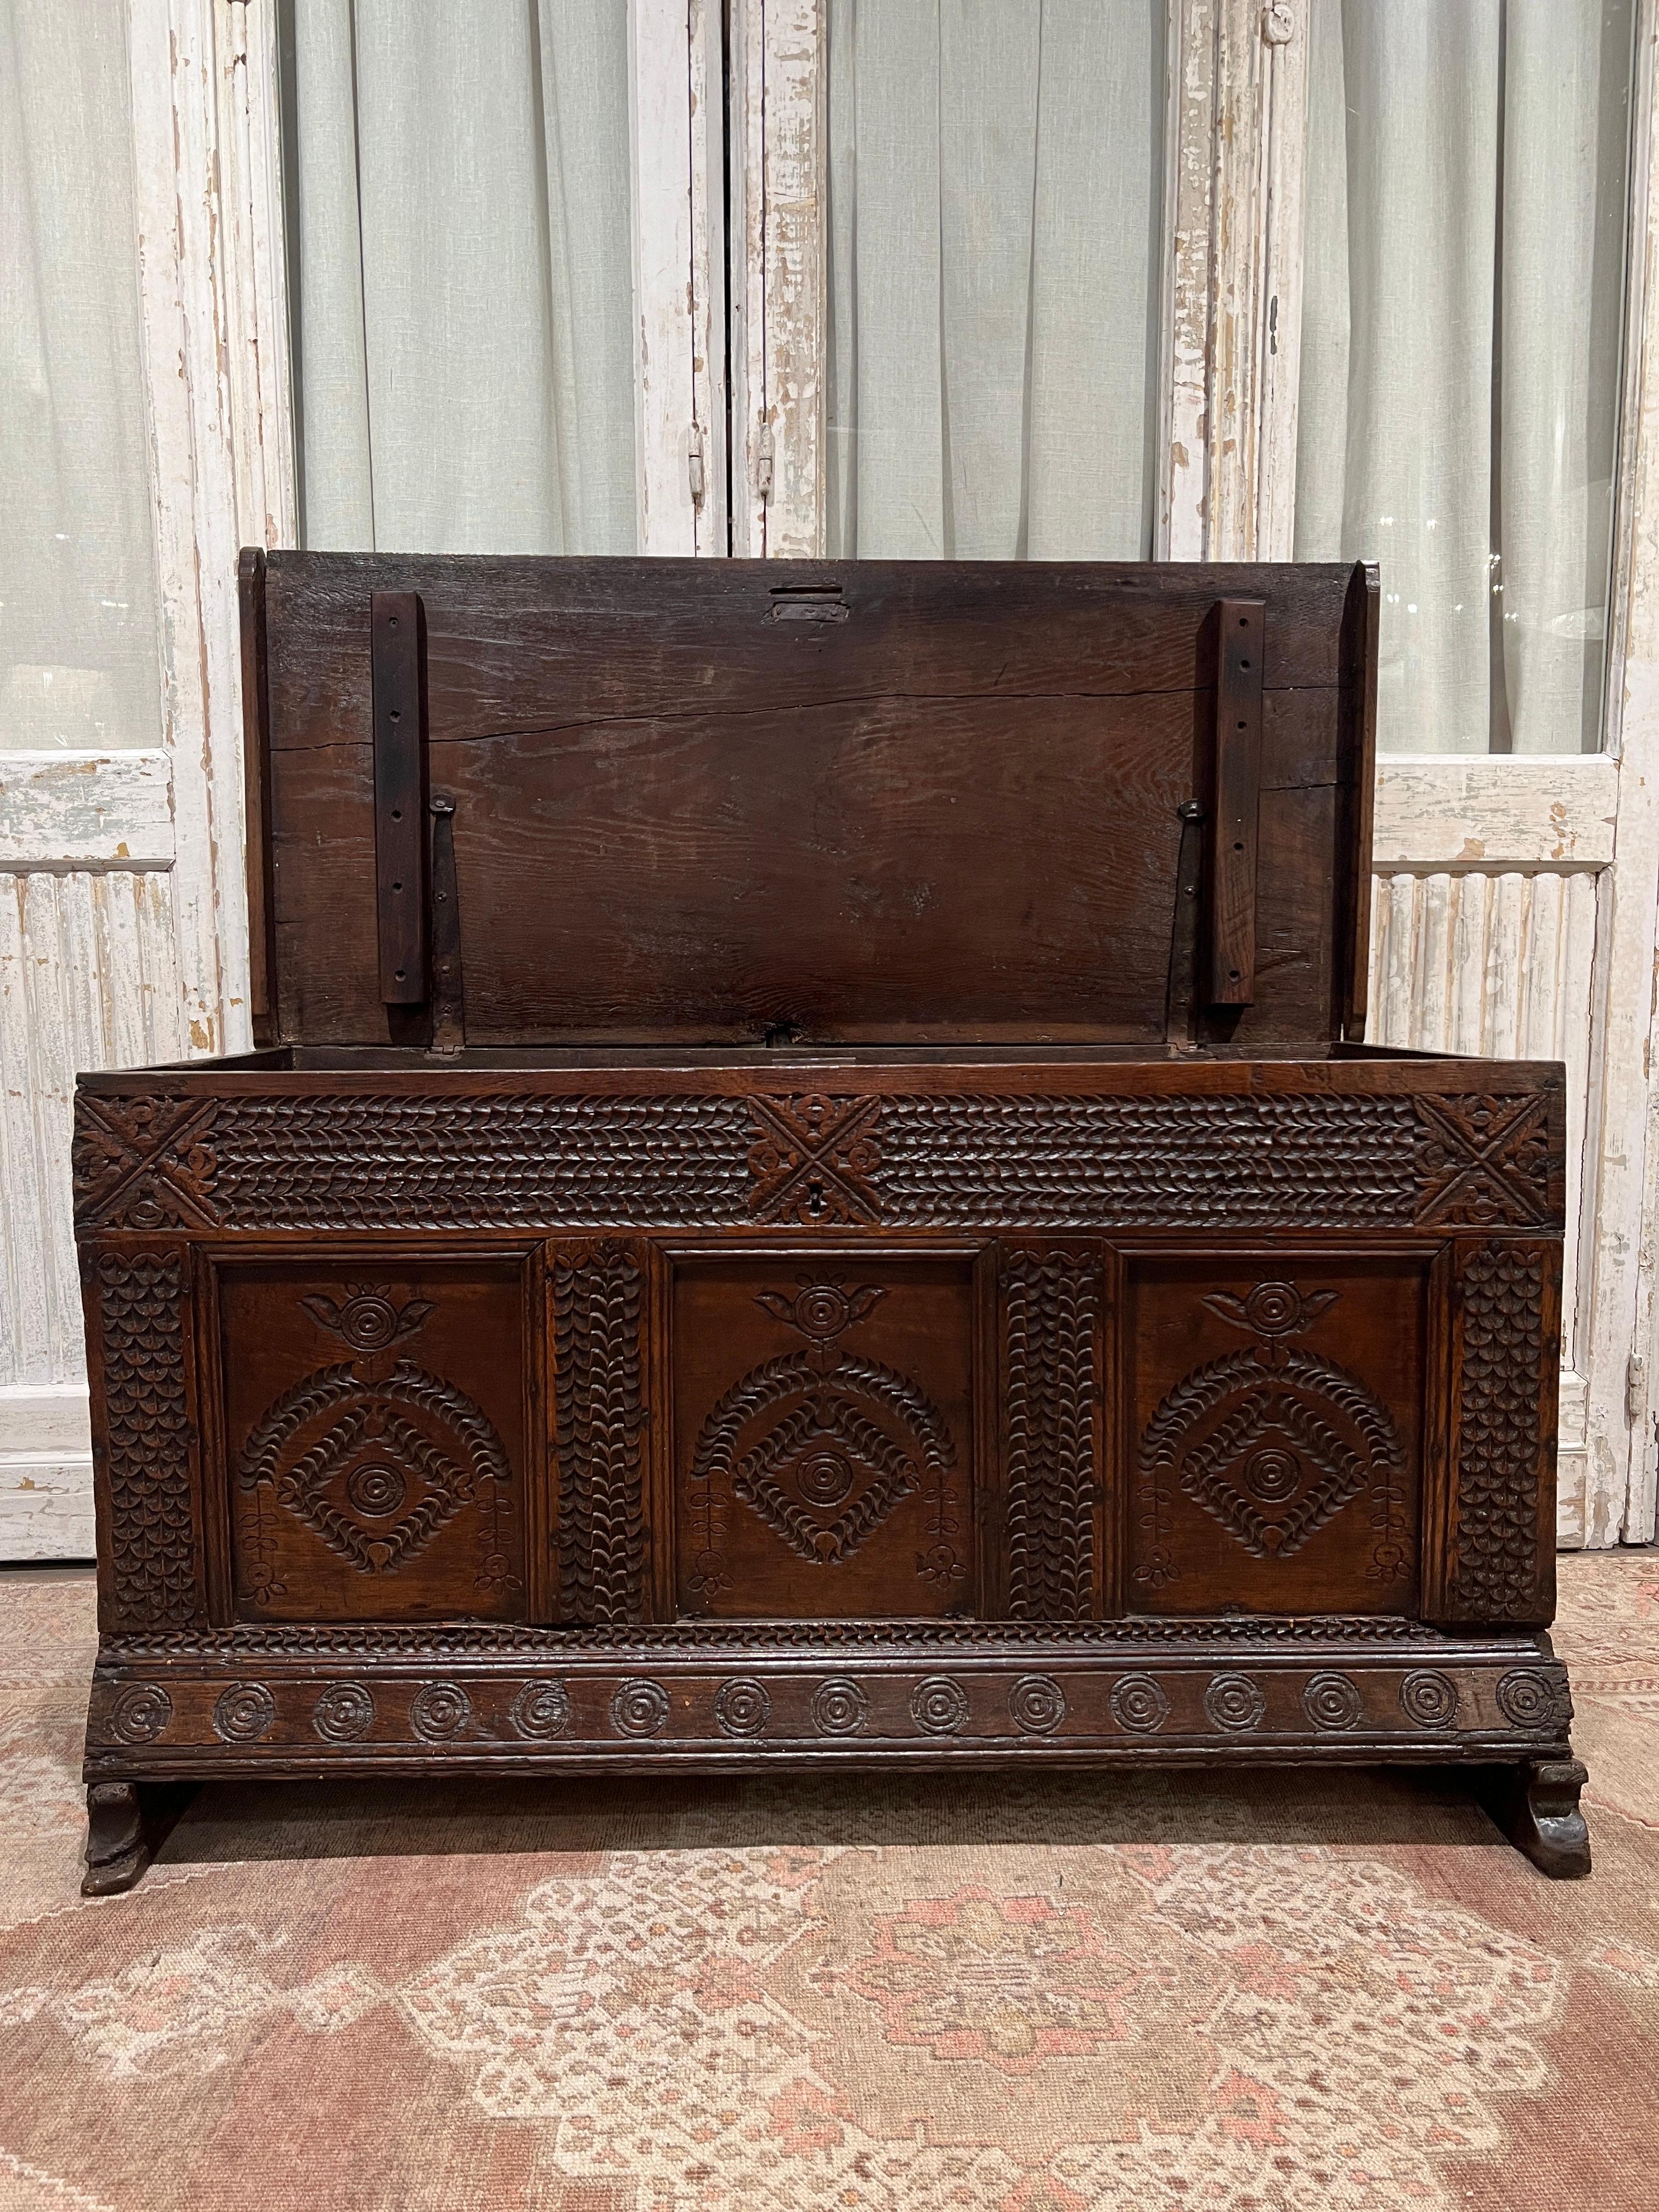 Iron Mid-17th Century English Carved Oak Blanket Chest For Sale